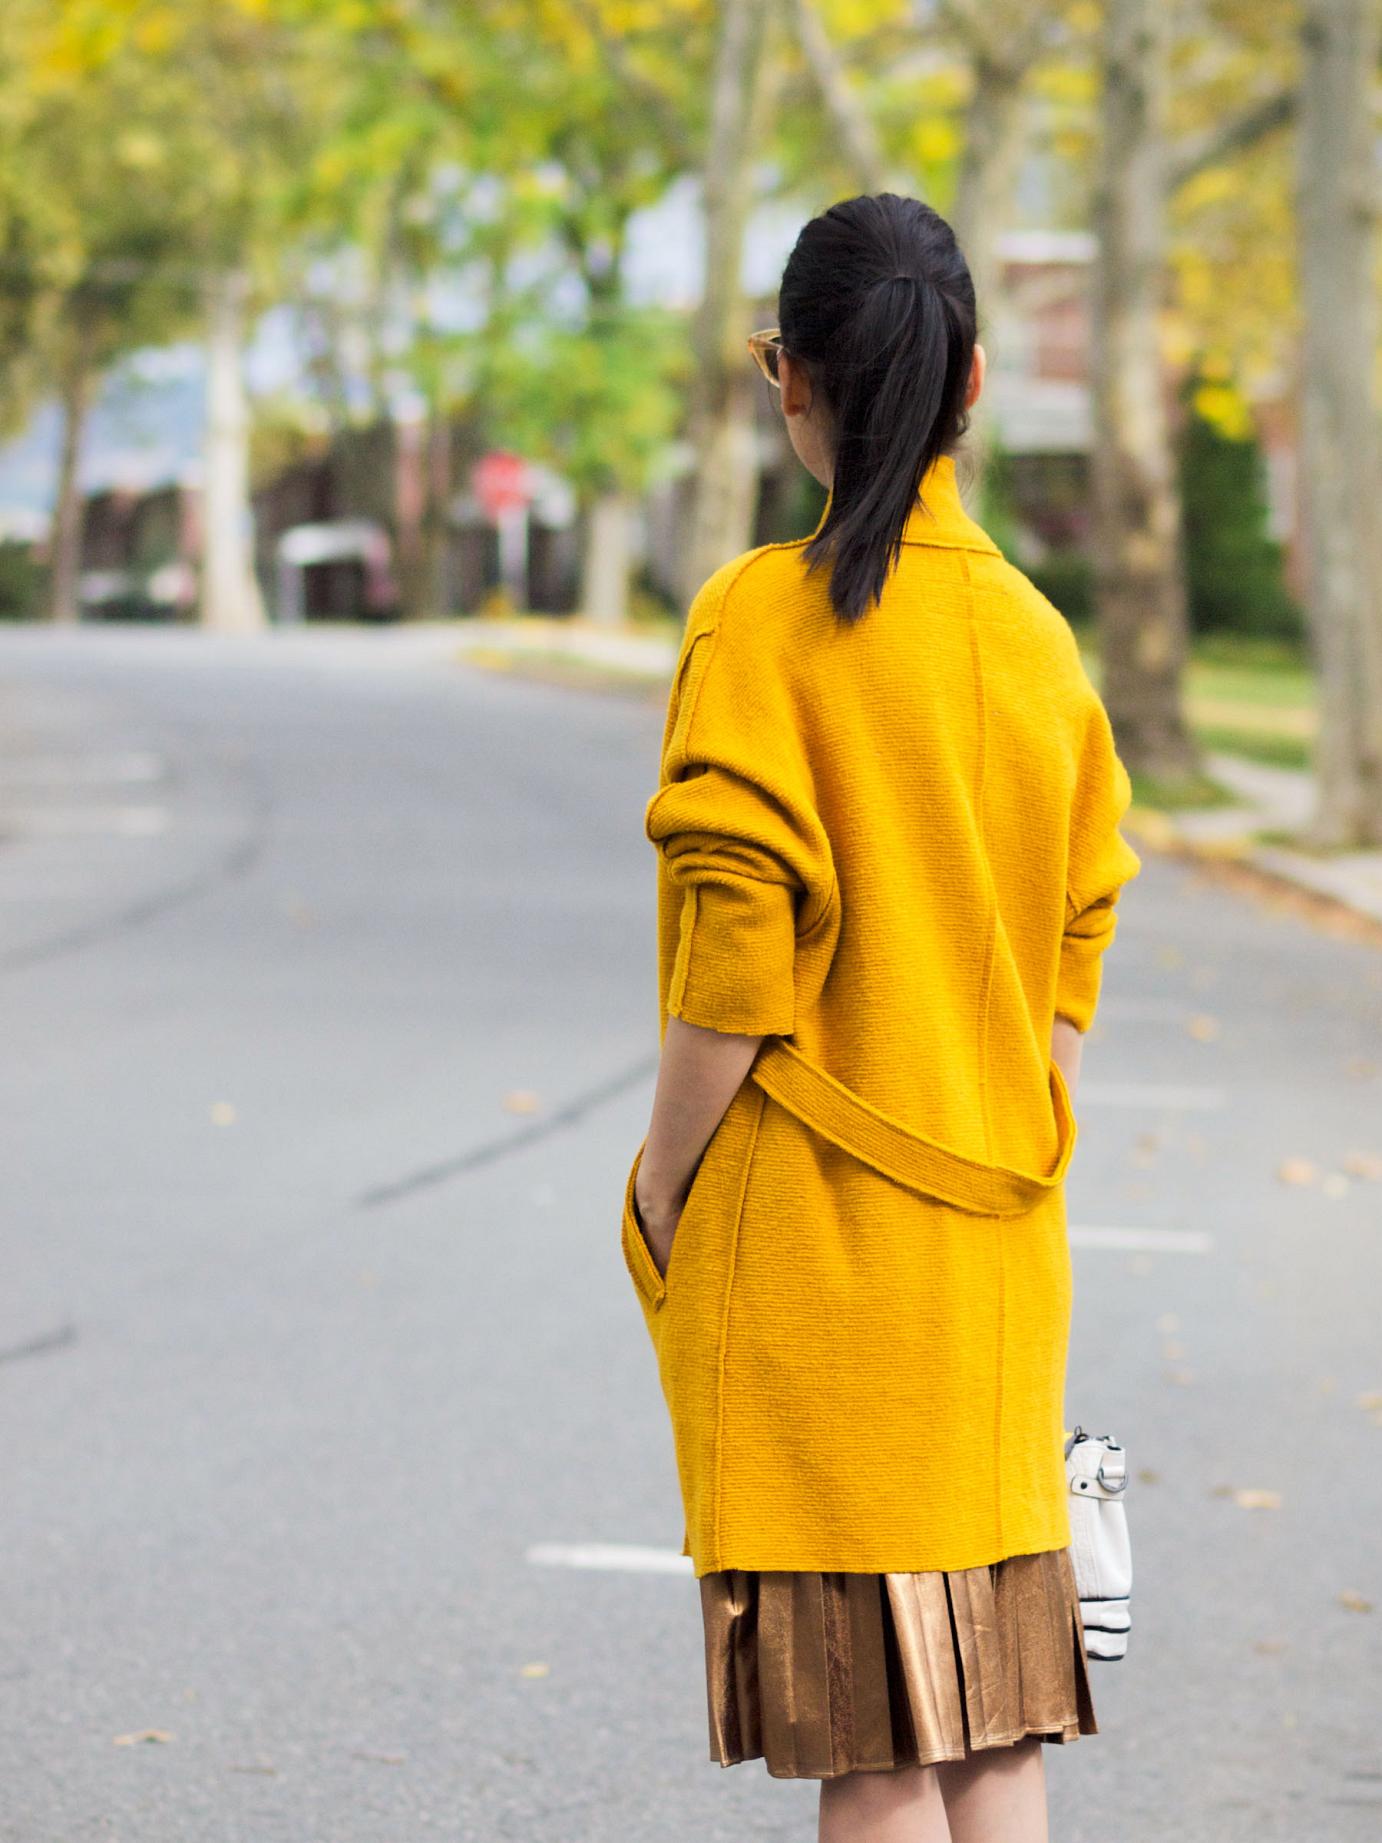 bittersweet colours, fall, fall coats, fall colors, fall trends, yellow coat, facine, pierre hardy shoes, metallic skirt, pleated skirt, metallic trends, eye cat sunglasses, maternity style, 18 weeks, street style, 